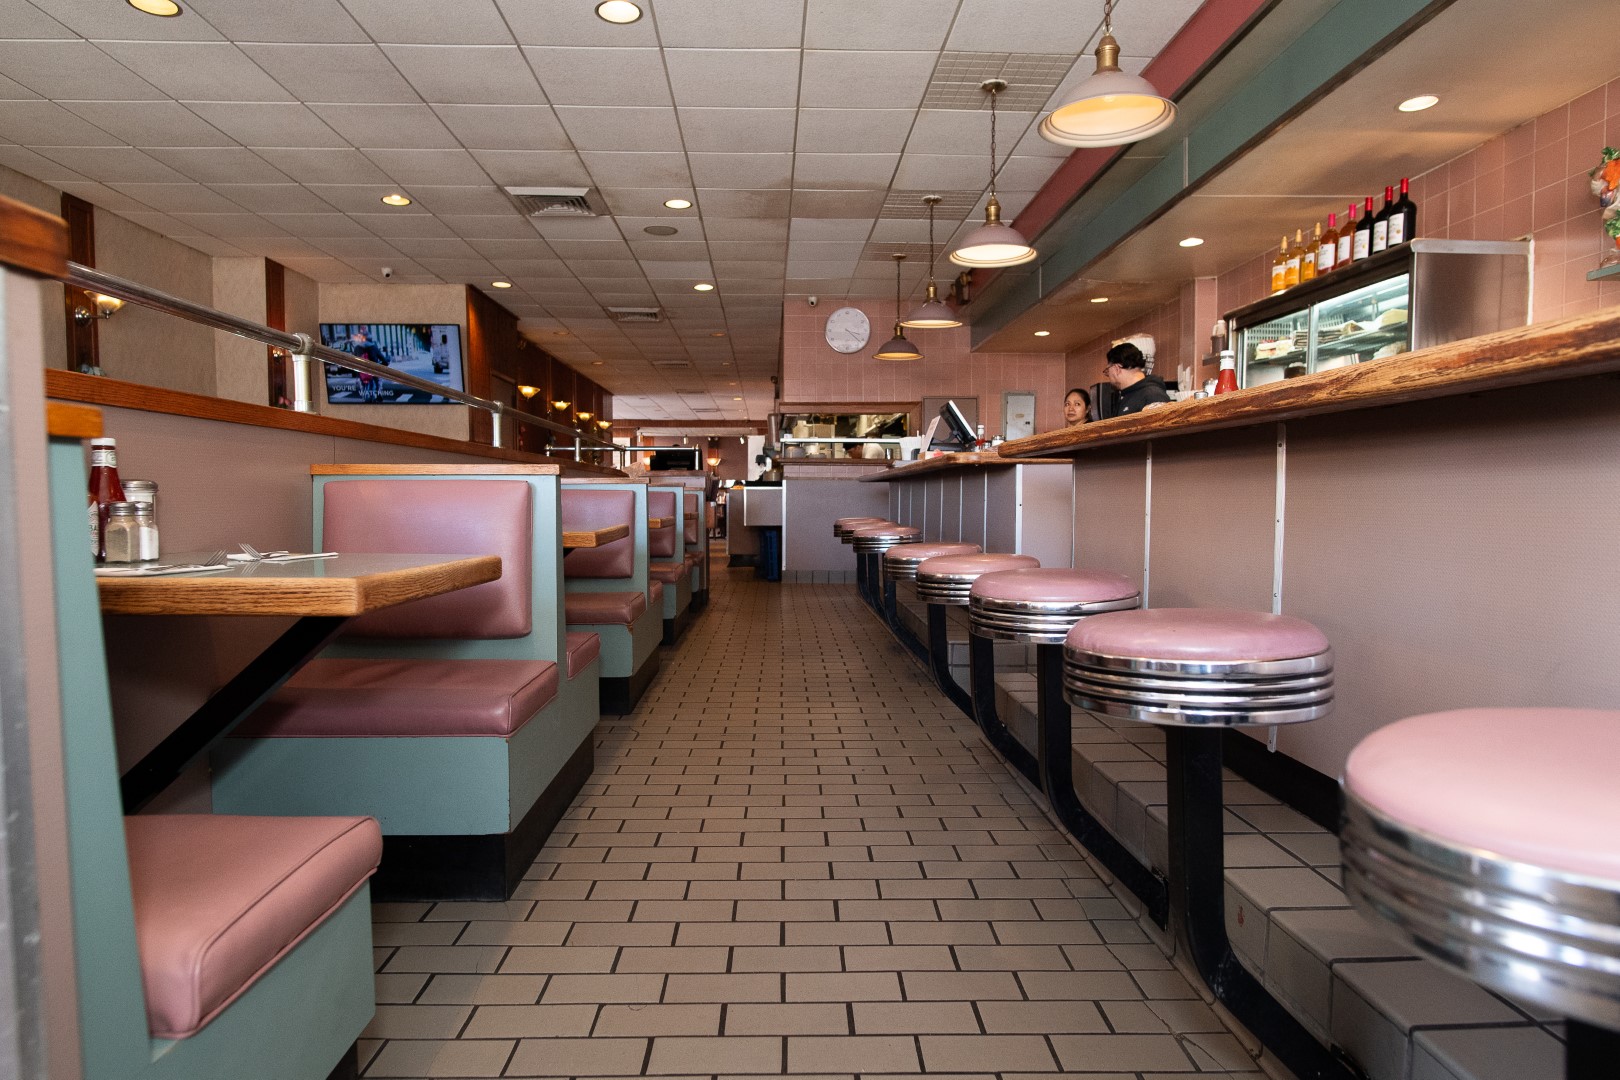 Interior of a classic diner featuring rows of pink and teal booths, chrome bar stools, and a tiled floor, with a counter and staff visible in the background.